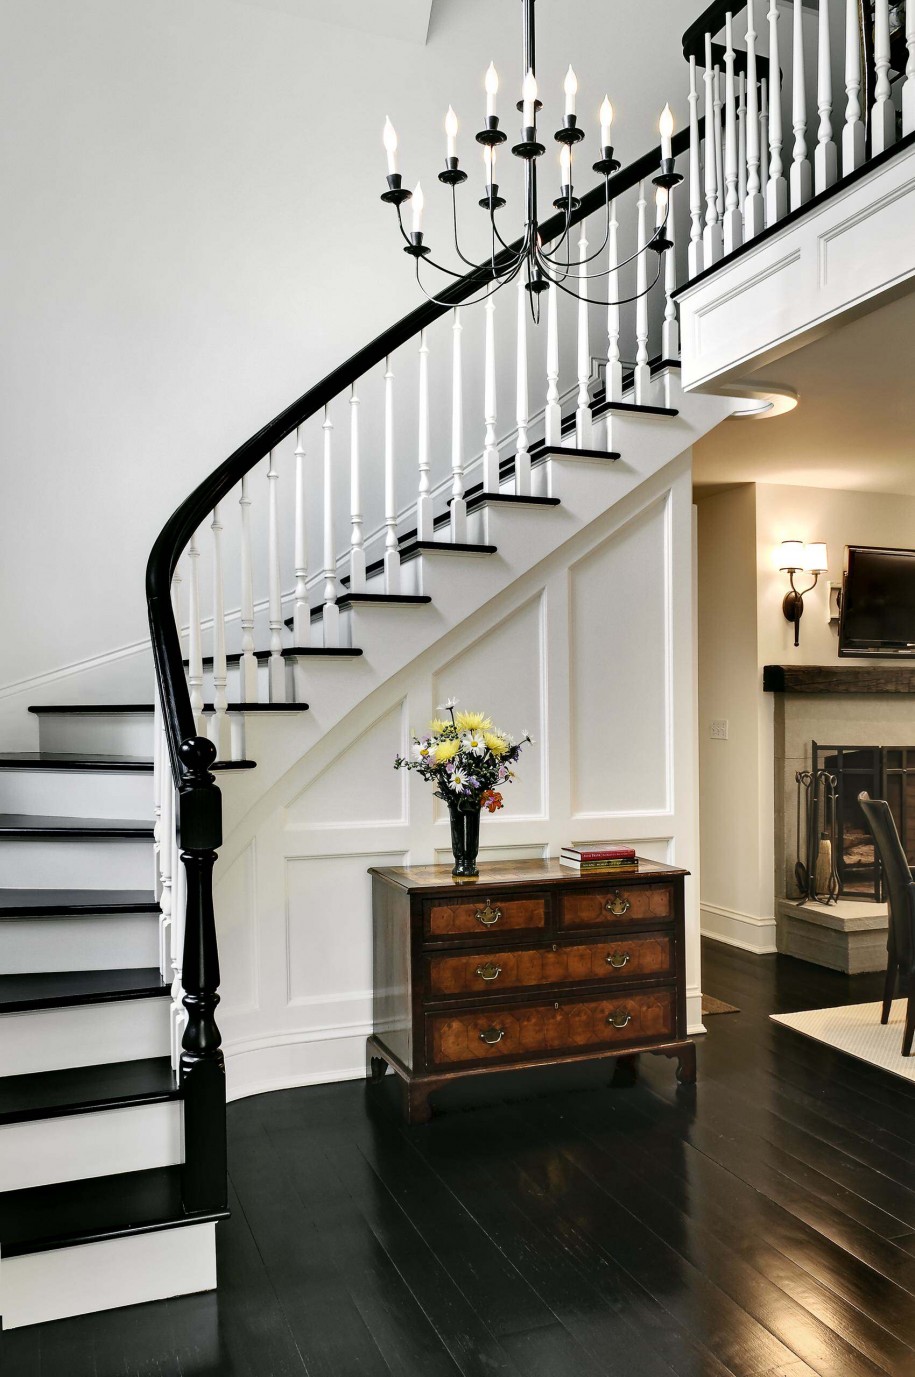 Wooden Side Under Small Wooden Side Board Put Under Curved Black And White Staircase Plus Decorative Wrought Iron Chandelier Decoration House Using Wrought Iron Chandeliers 